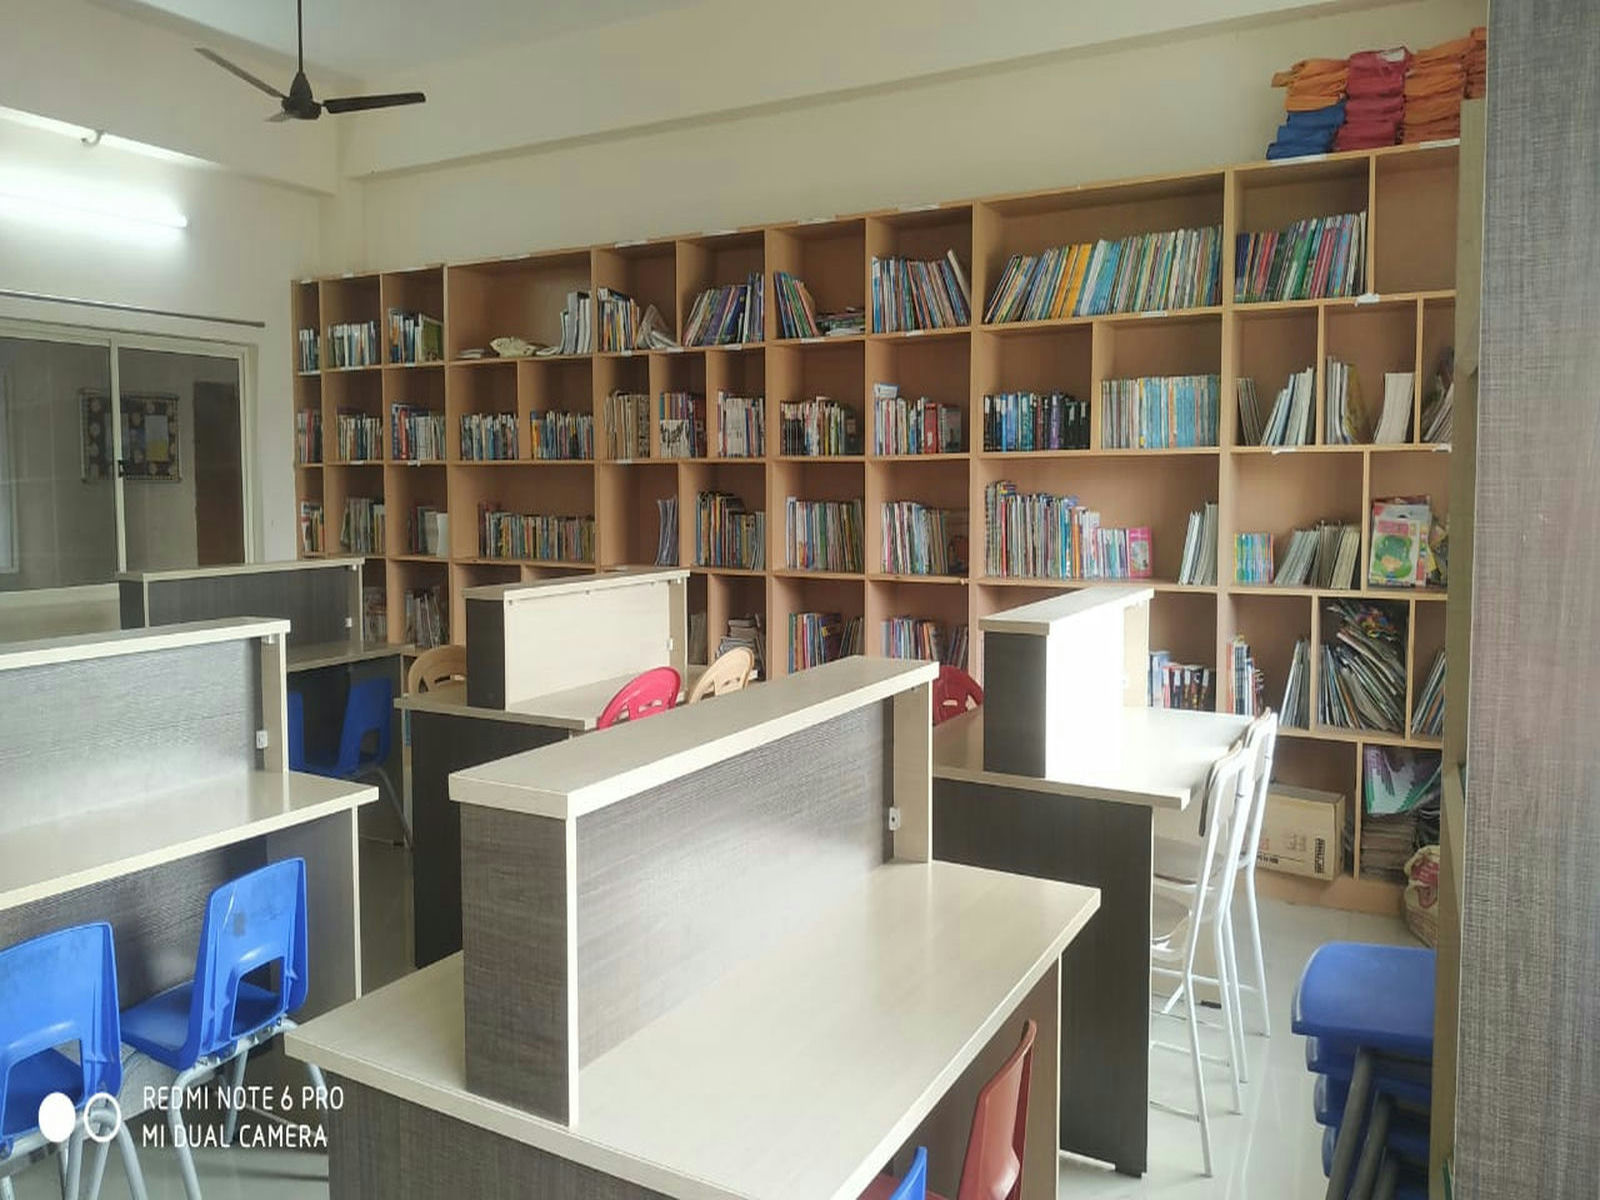 Library of one of the top cbse schools in chennai